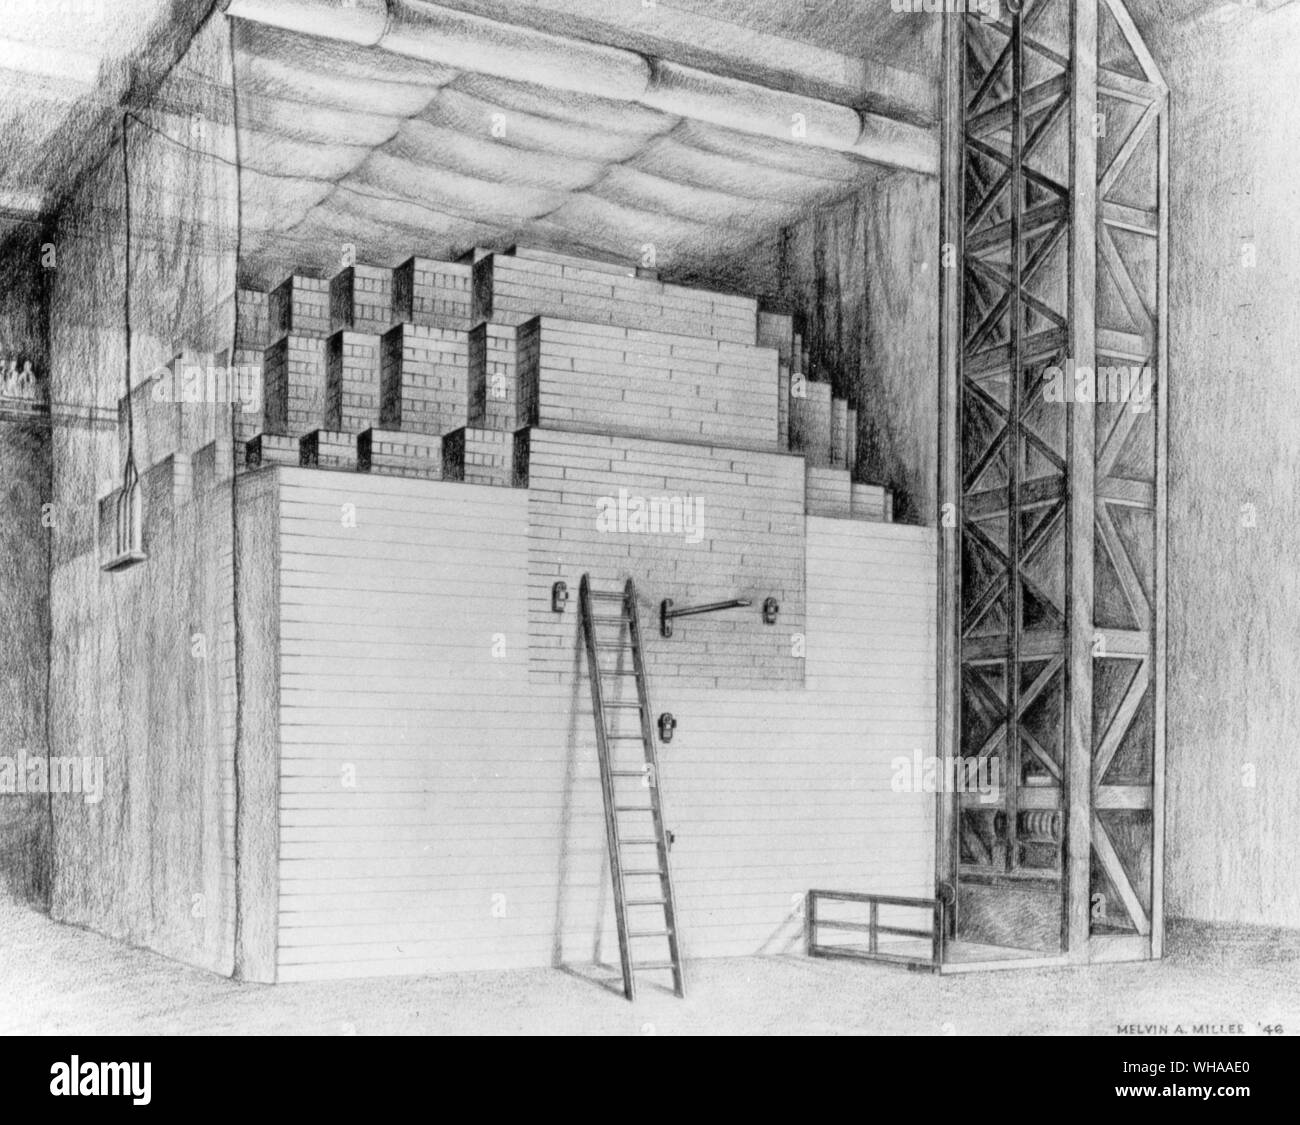 Sketch of the worlds first reactor. Due to wartime secrecy there are no photographs of the completed reactor. The reactor itself was composed of layers of graphite interspersed with Uranium. Criticality, that is, self sustained chain reaction, was achieved on December 2nd 1942, when the 57th layer was added. This gave rise to the early name for reactor ' piles ' because of piling one layer on another. Achieving control of the release of the power of the atom was a major breakthrough in what was then a race to make an atomic weapon. Word of the success was telephoned immediately to Washington Stock Photo